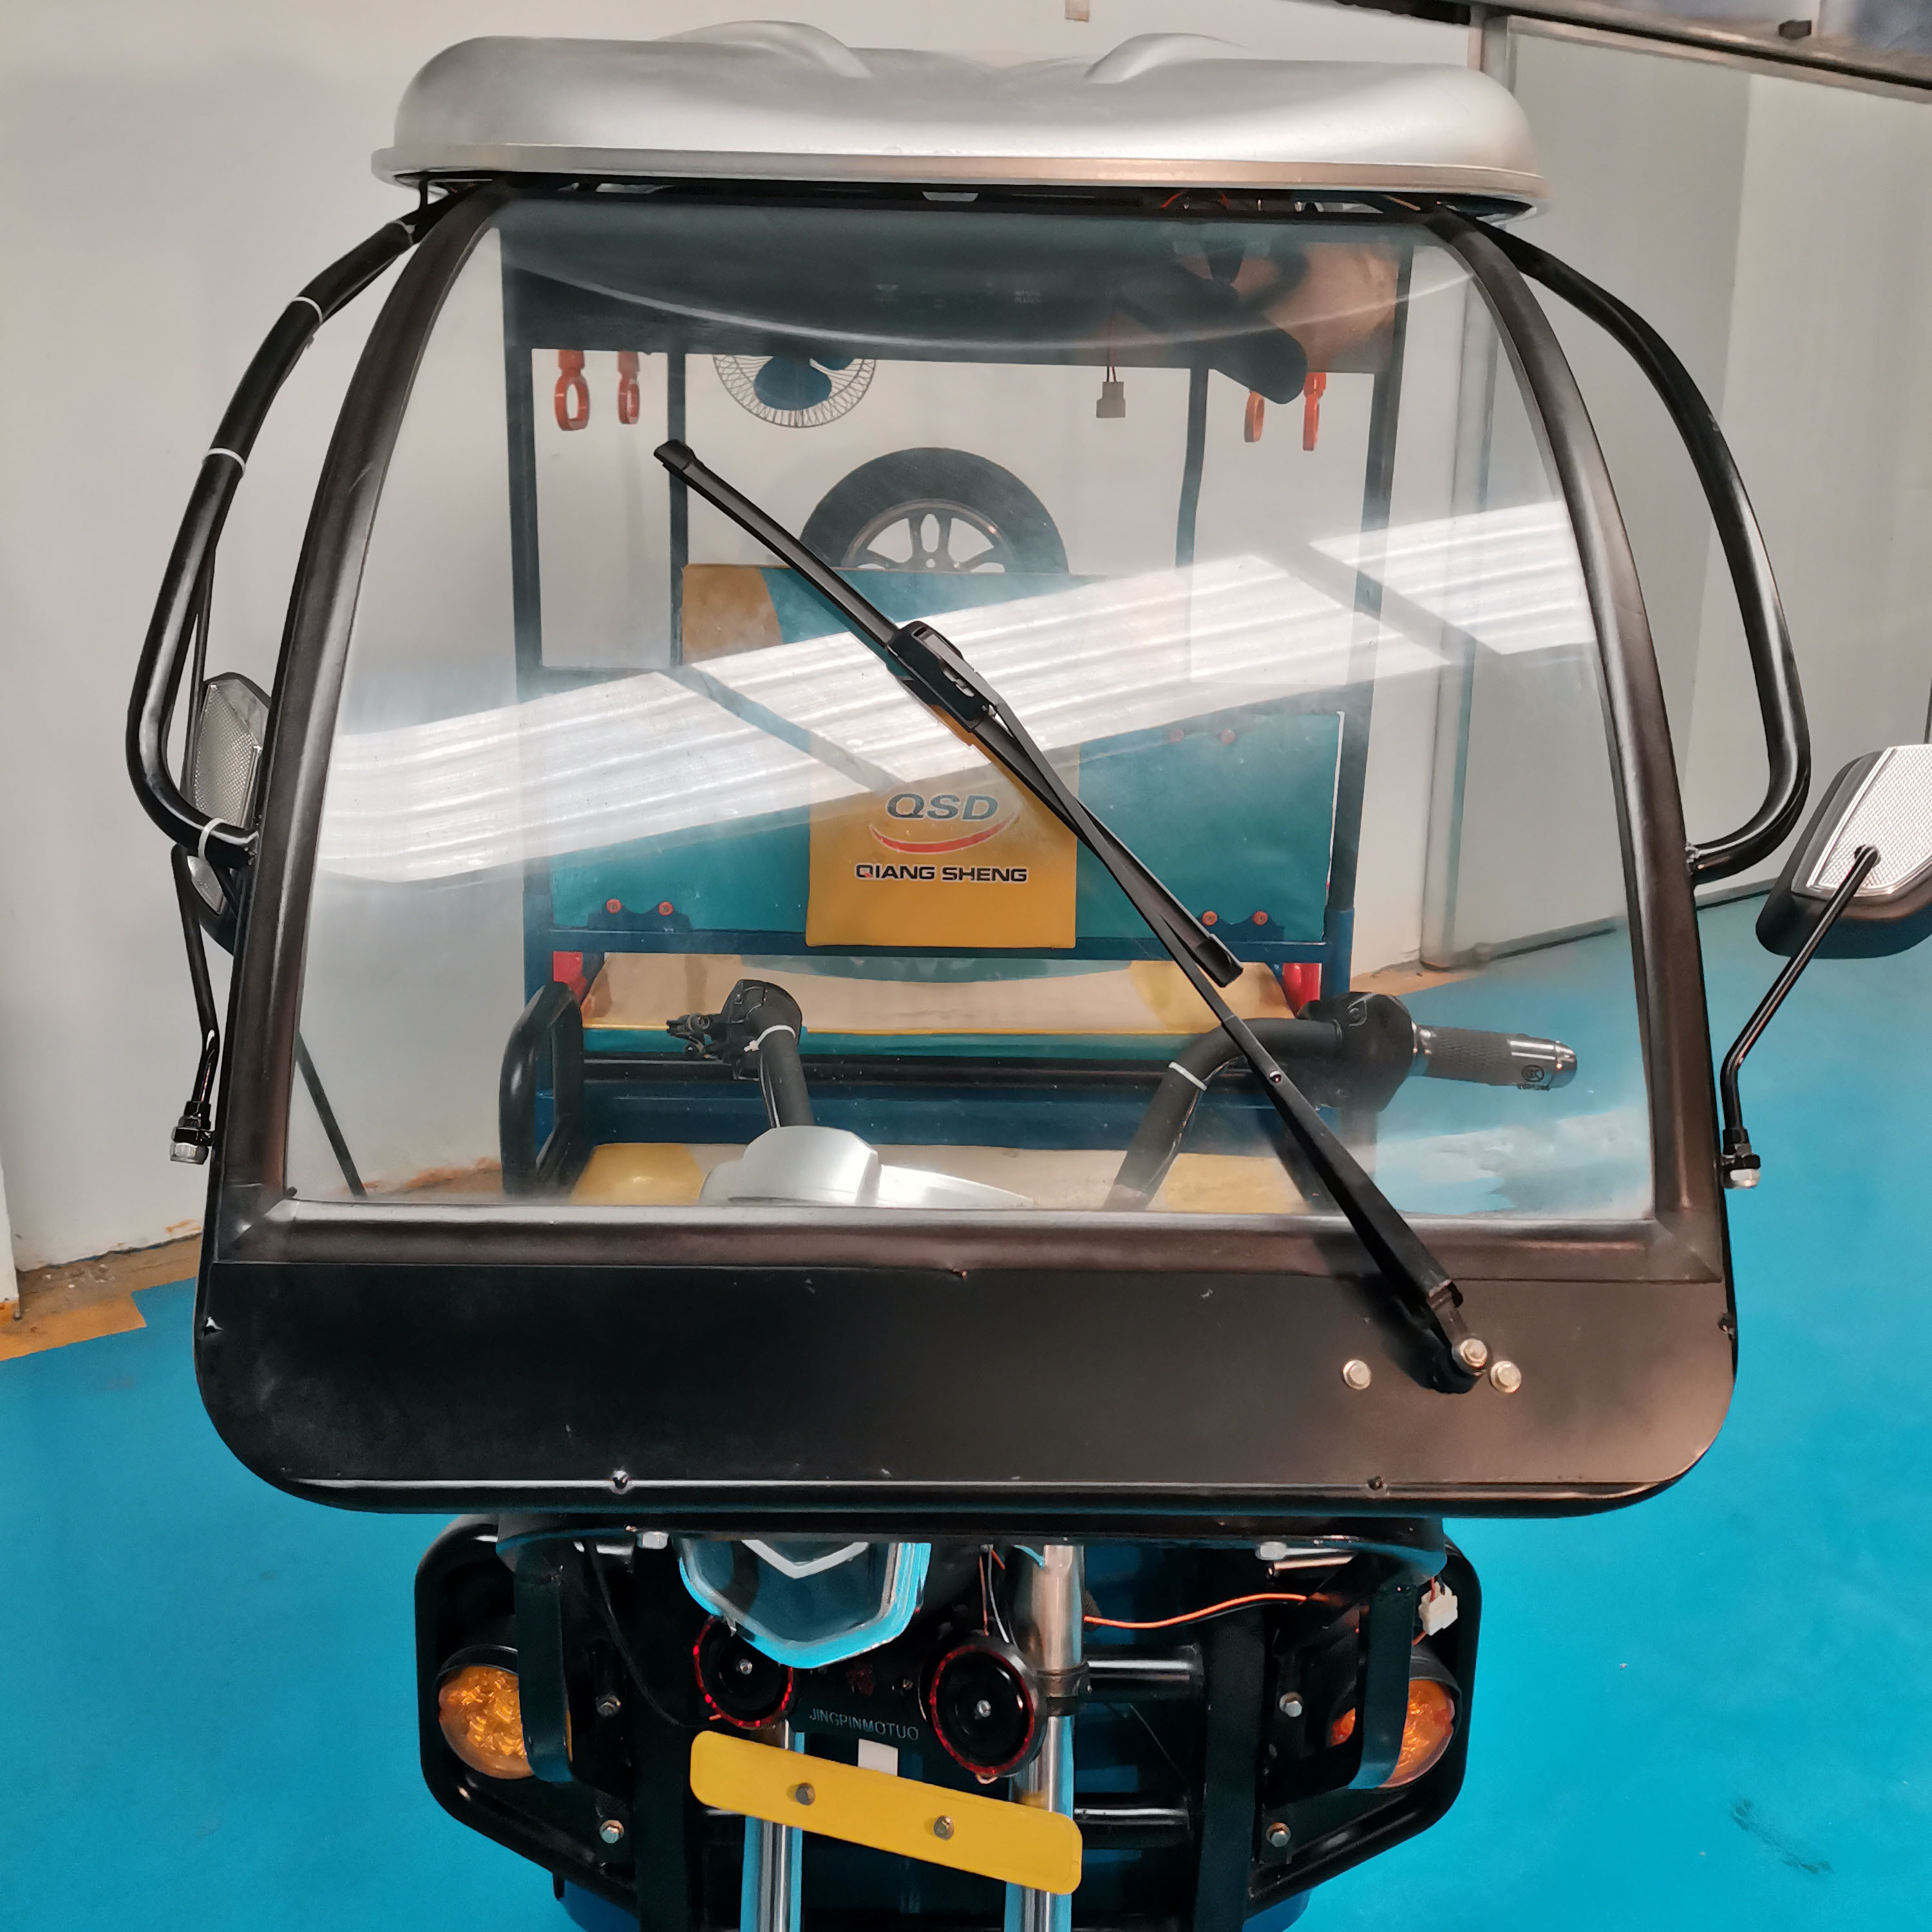 China Wholesale Electric Tricycles Price Suppliers - Best Motorized Tricycle Price For Indian E Rickshaw Importers Wholesaler, Distributor from China Tuk Tuk Factory – Qiangsheng detail pictures